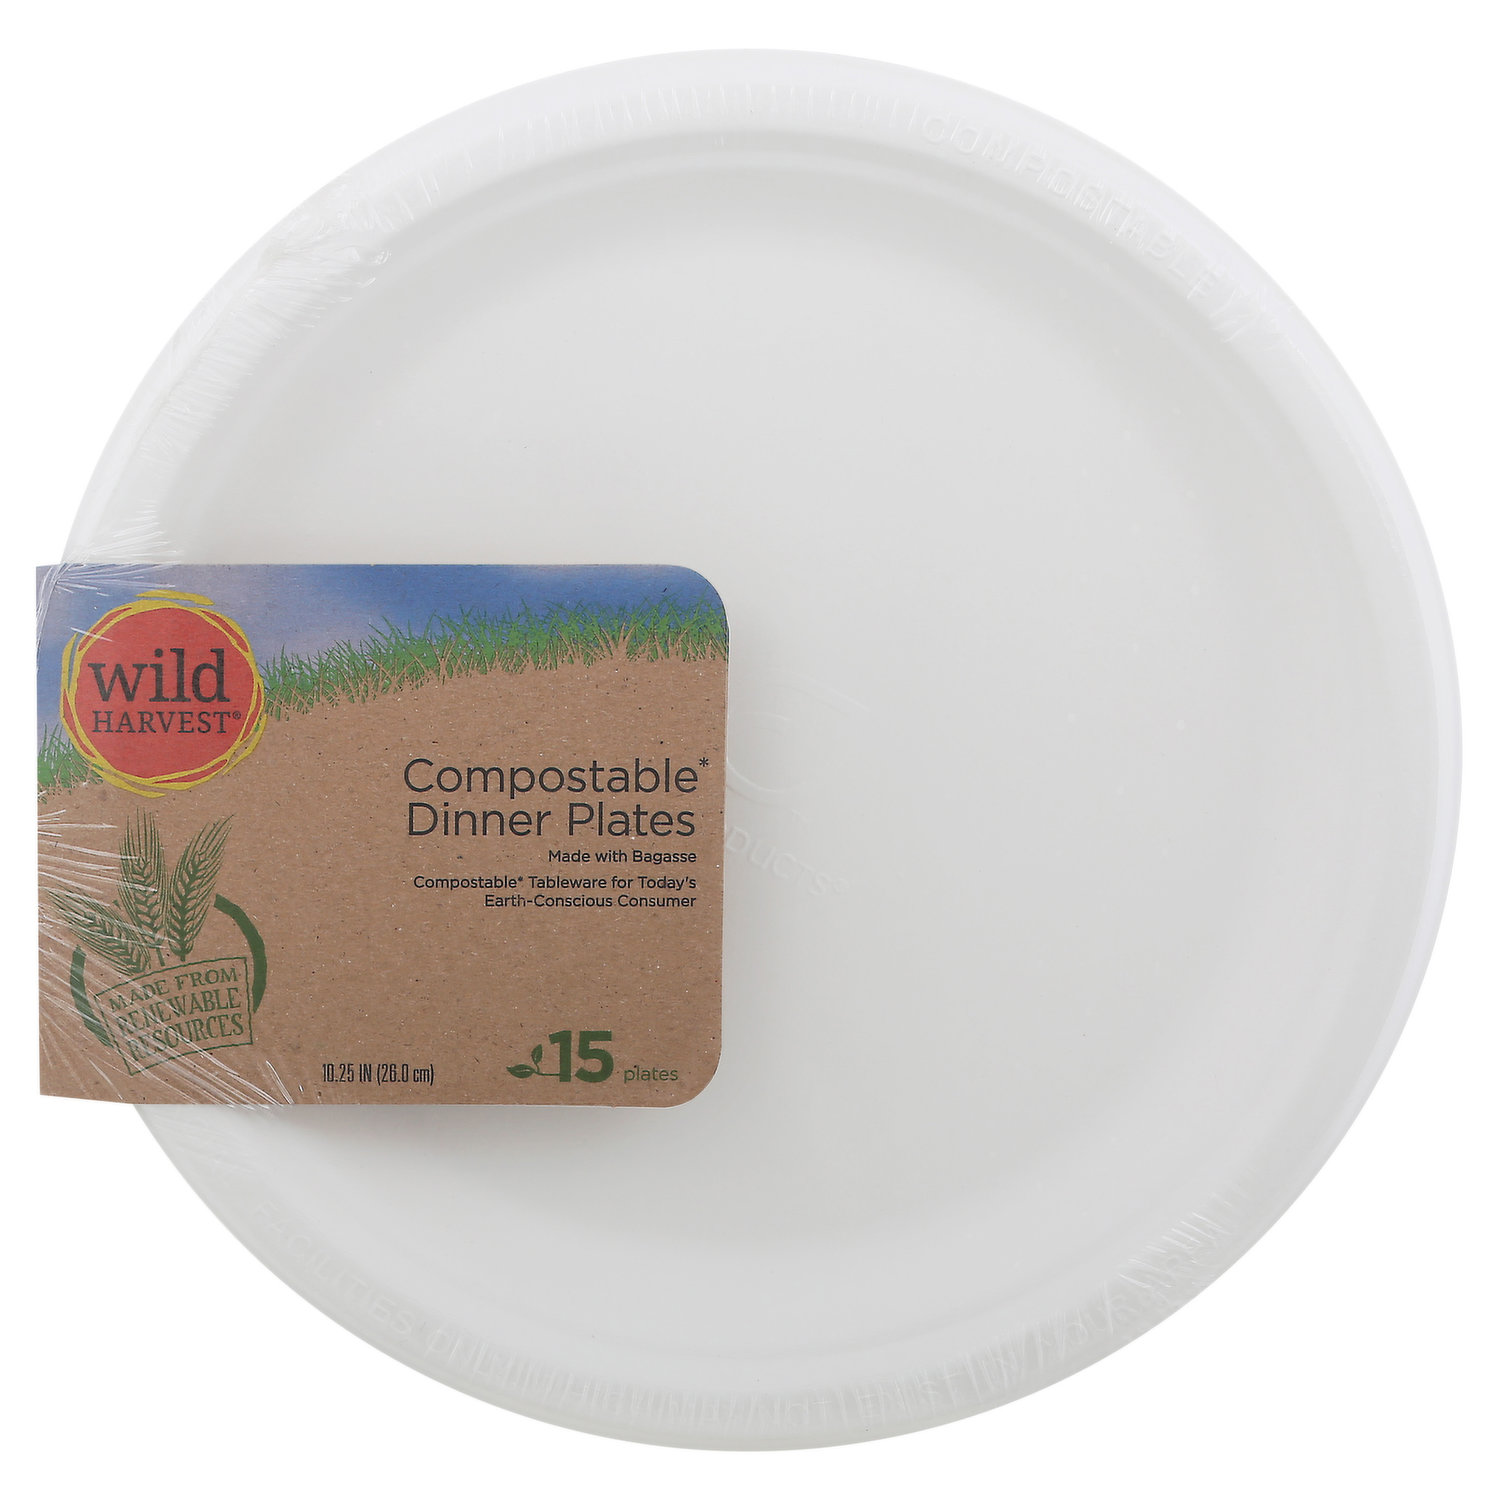 Hefty Everyday Plates, Soak Proof, 10.25 Inches - 25 plates